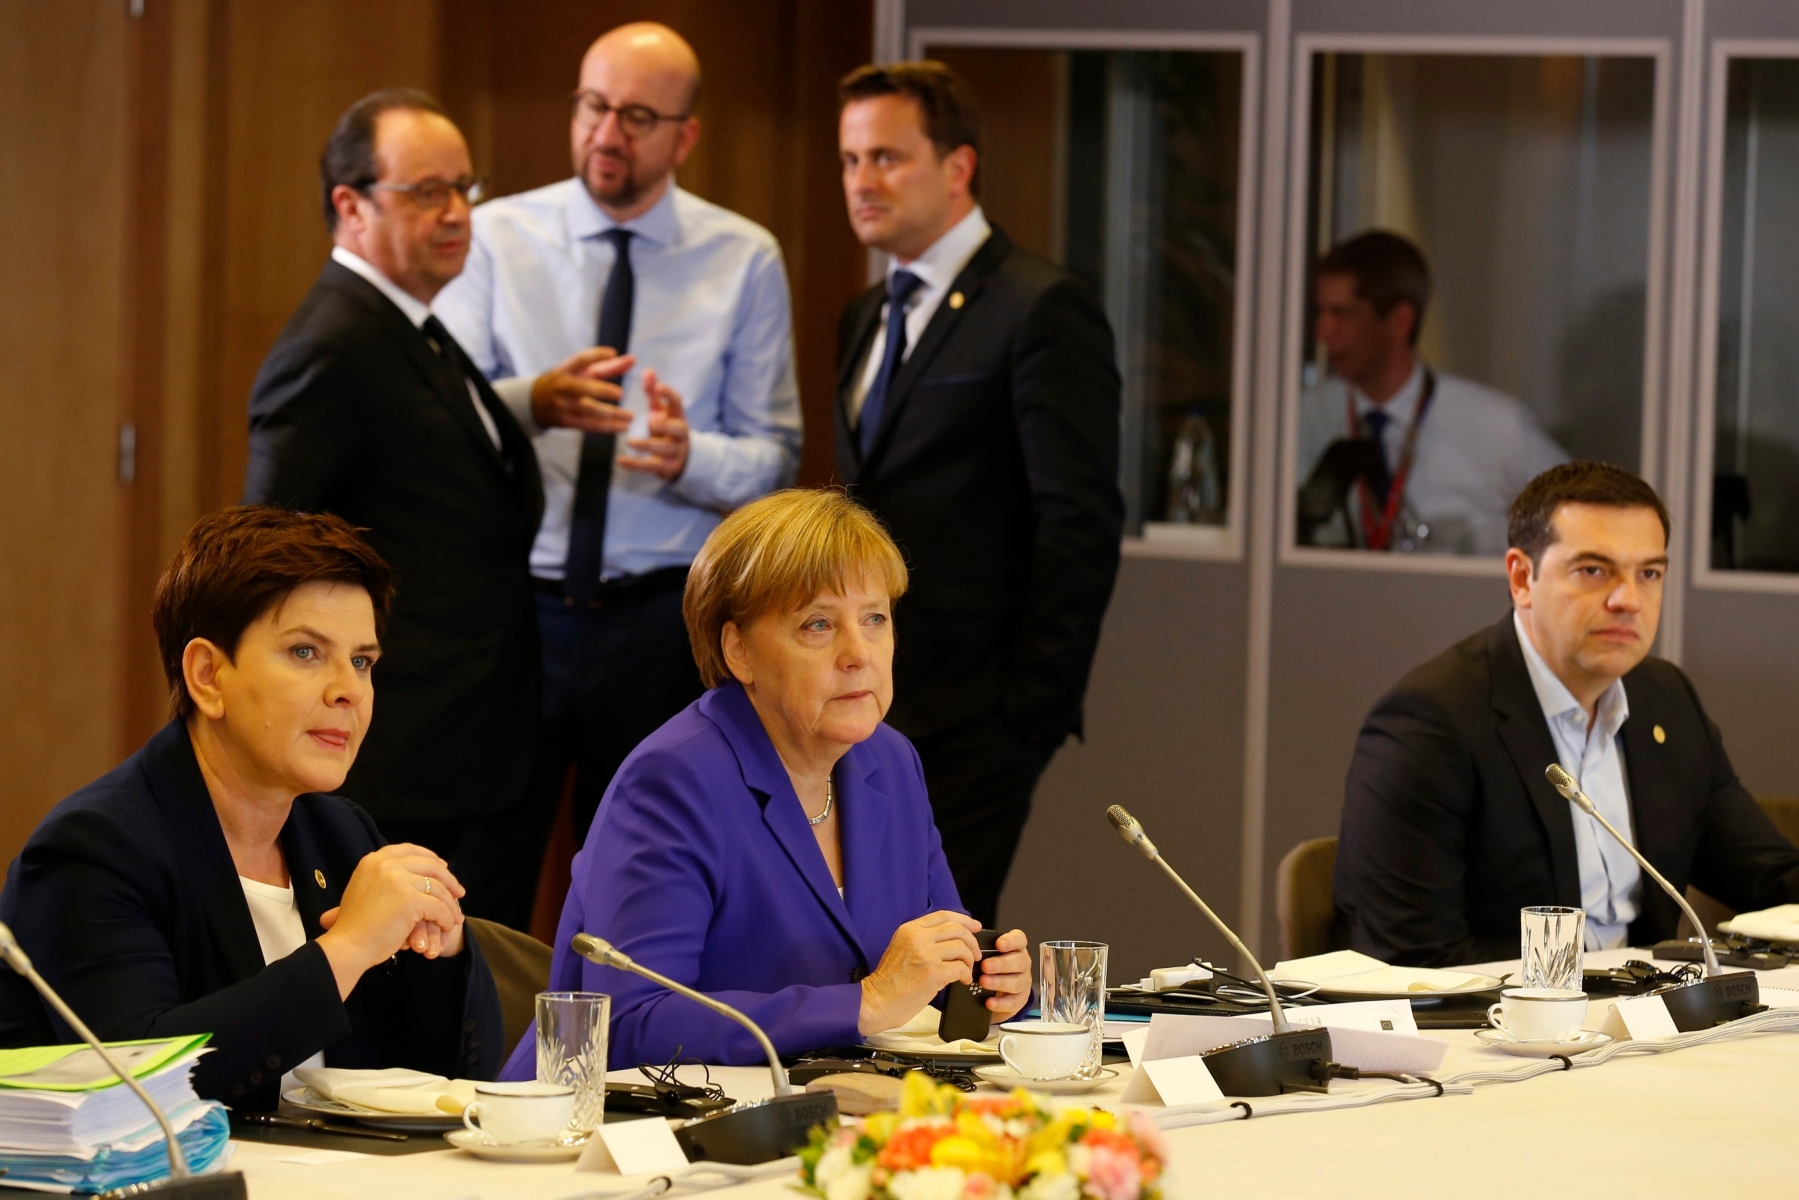 epa05397271 (L-R, front) Polish Prime Minister Beata Szydlo, German Chancellor Angela Merkel and Greek Prime Minister Alexis Tsipras at the start of the second day of the European Council meeting in Brussels, Belgium, 29 June 2016. EU leaders met on 28 June for the first time since the British referendum, in which 51.9 percent voted to leave the European Union.  EPA/PASCAL ROSSIGNOL / POOL BELGIUM EUROPEAN COUNCIL MEETING BRITAIN BREXIT